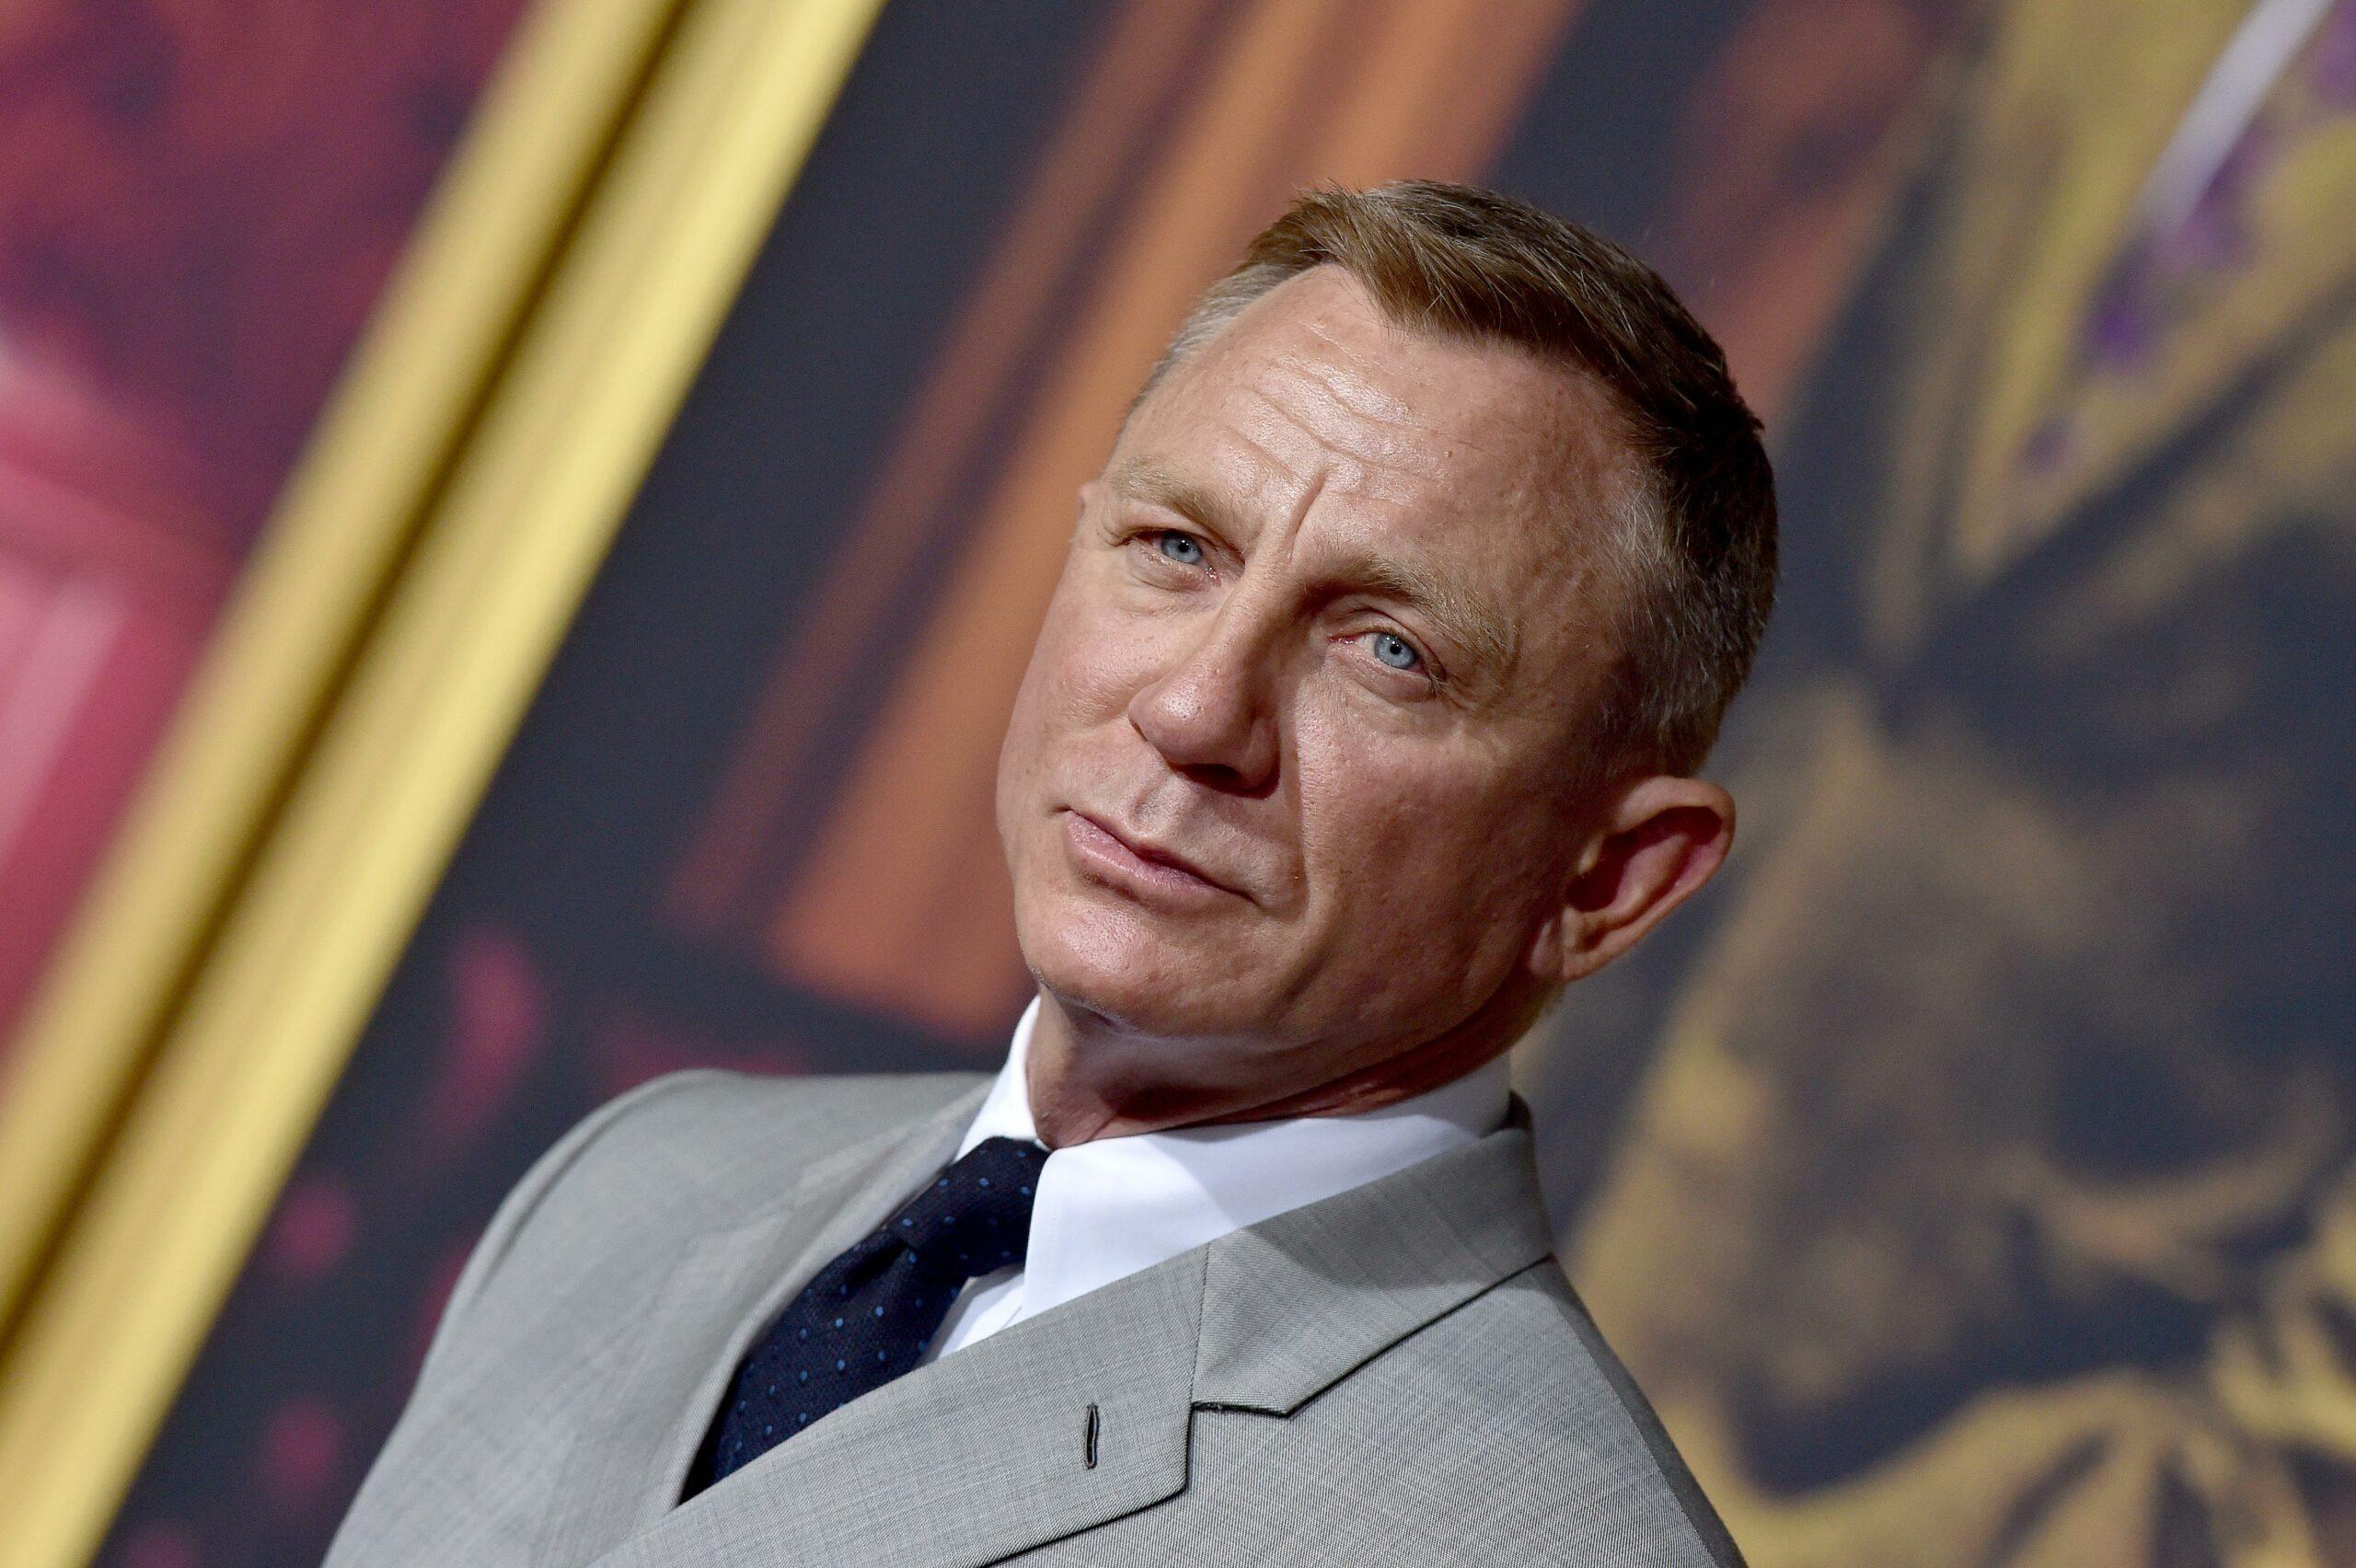 Daniel Craig Tests Positive For COVID-19, Cancels Return To Broadway